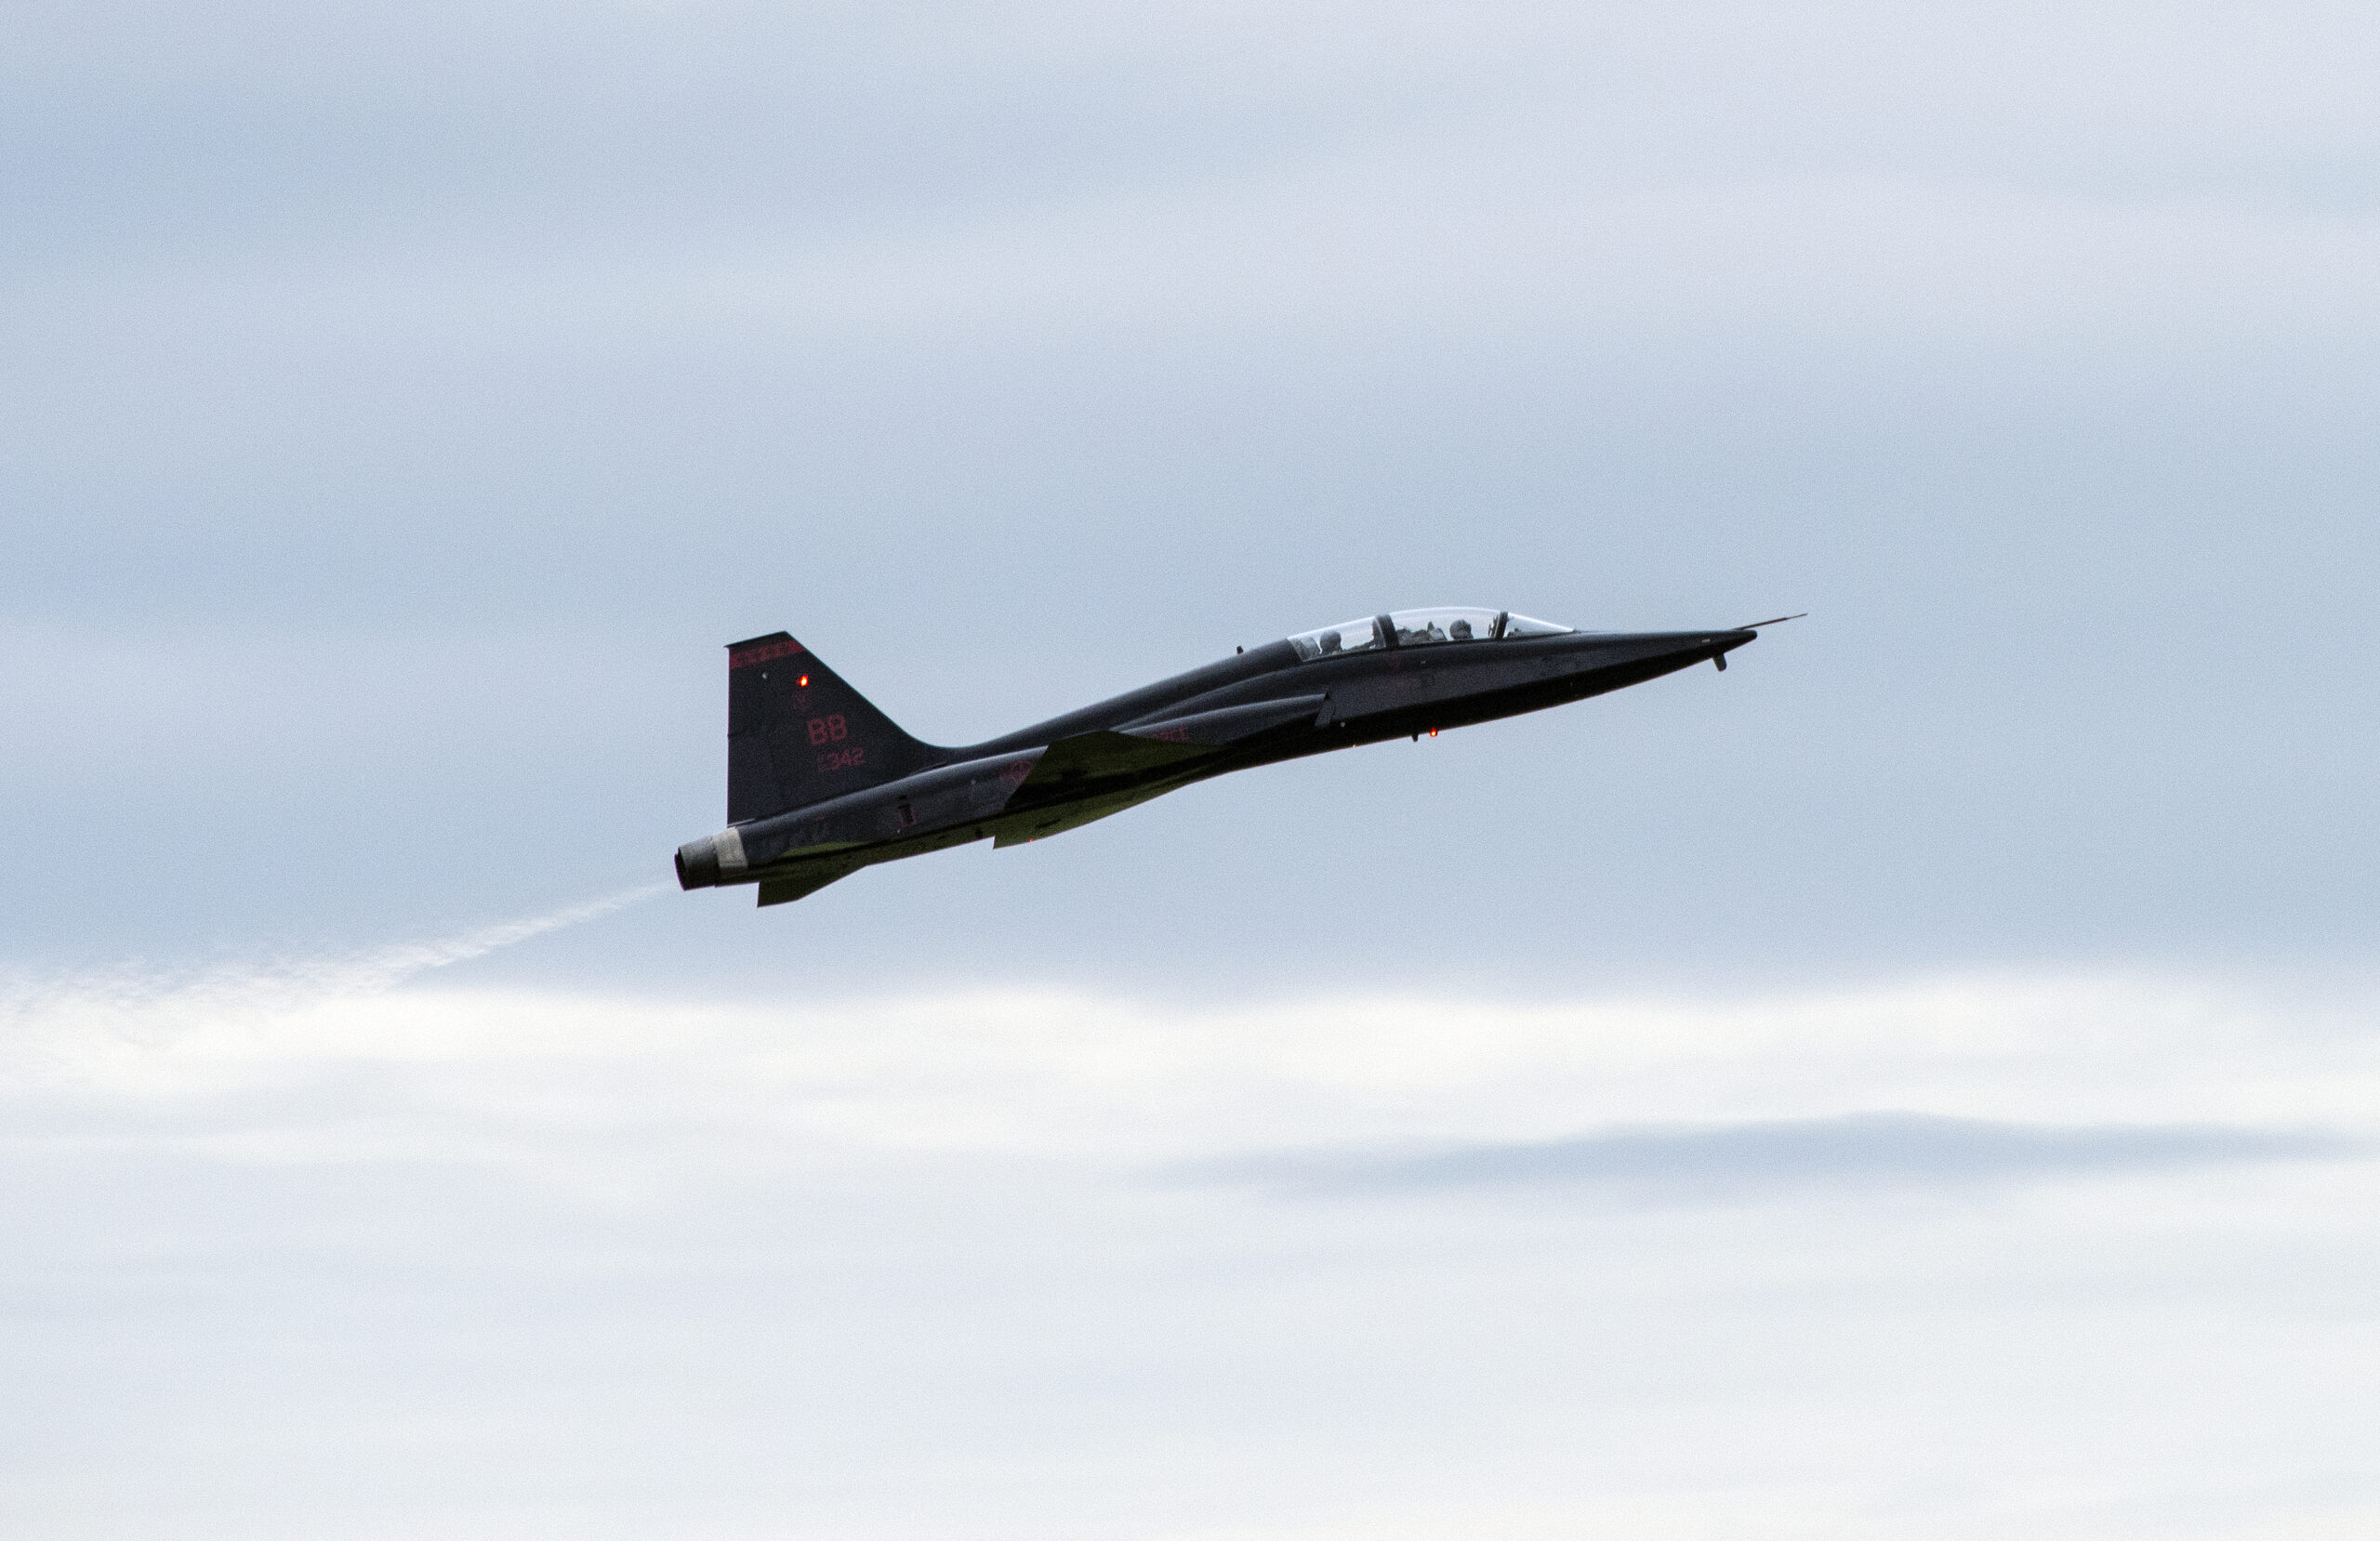 A U.S. Air Force T-38 Talon jet trainer from Beale Air Force Base, California, practices "touch and go" procedures, March 25, 2019 at Travis Air Force Base, California. The Talon is a twin-engine, high-altitude, supersonic aircraft utilized by U-2 “Dragon Lady” pilots to maintain flying proficiency. (U.S. Air Force photo by Heide Couch)